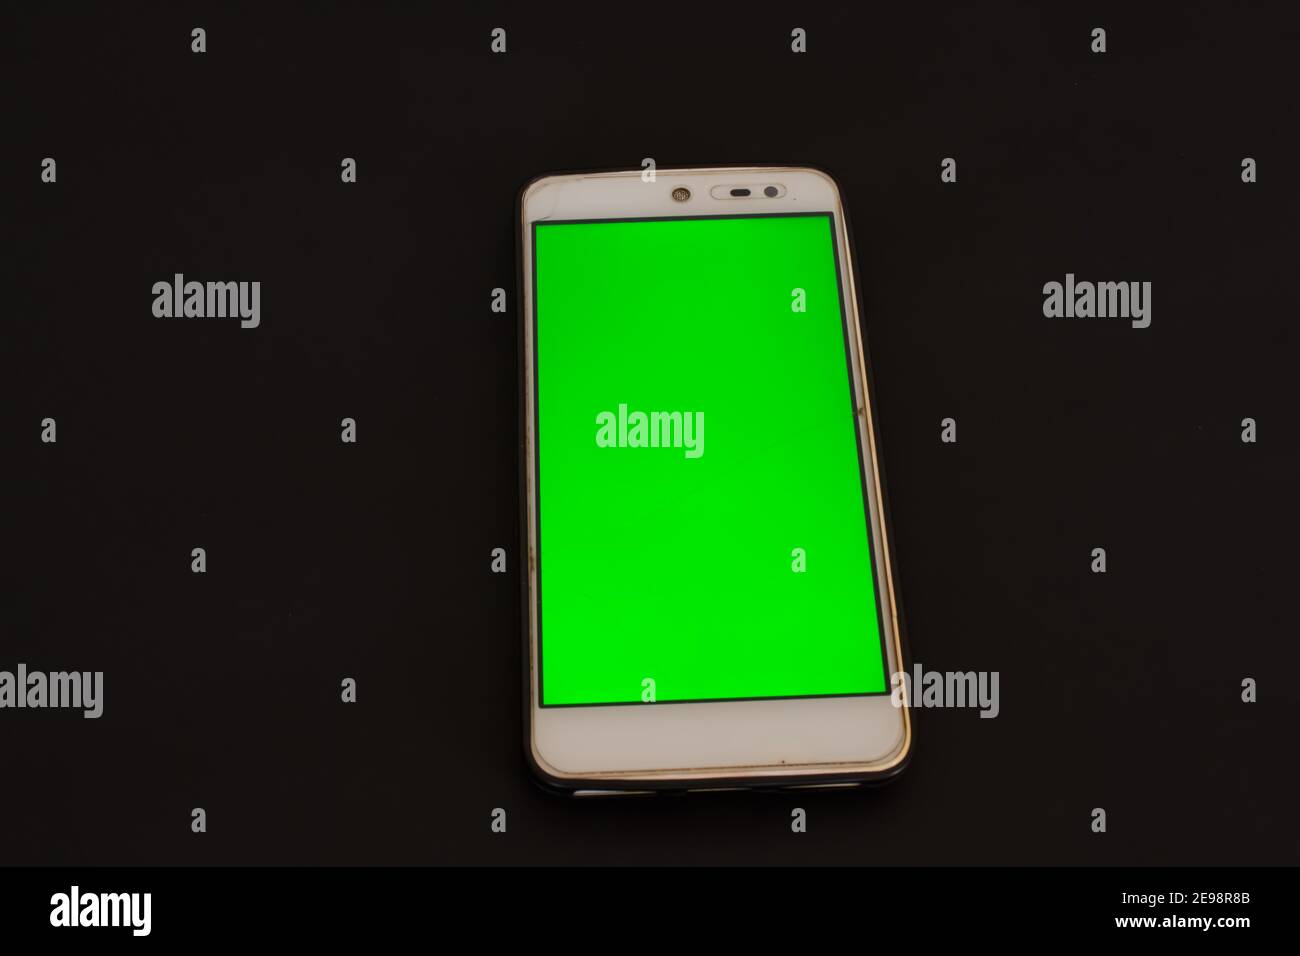 Smartphone with green screen on black background. Stock Photo